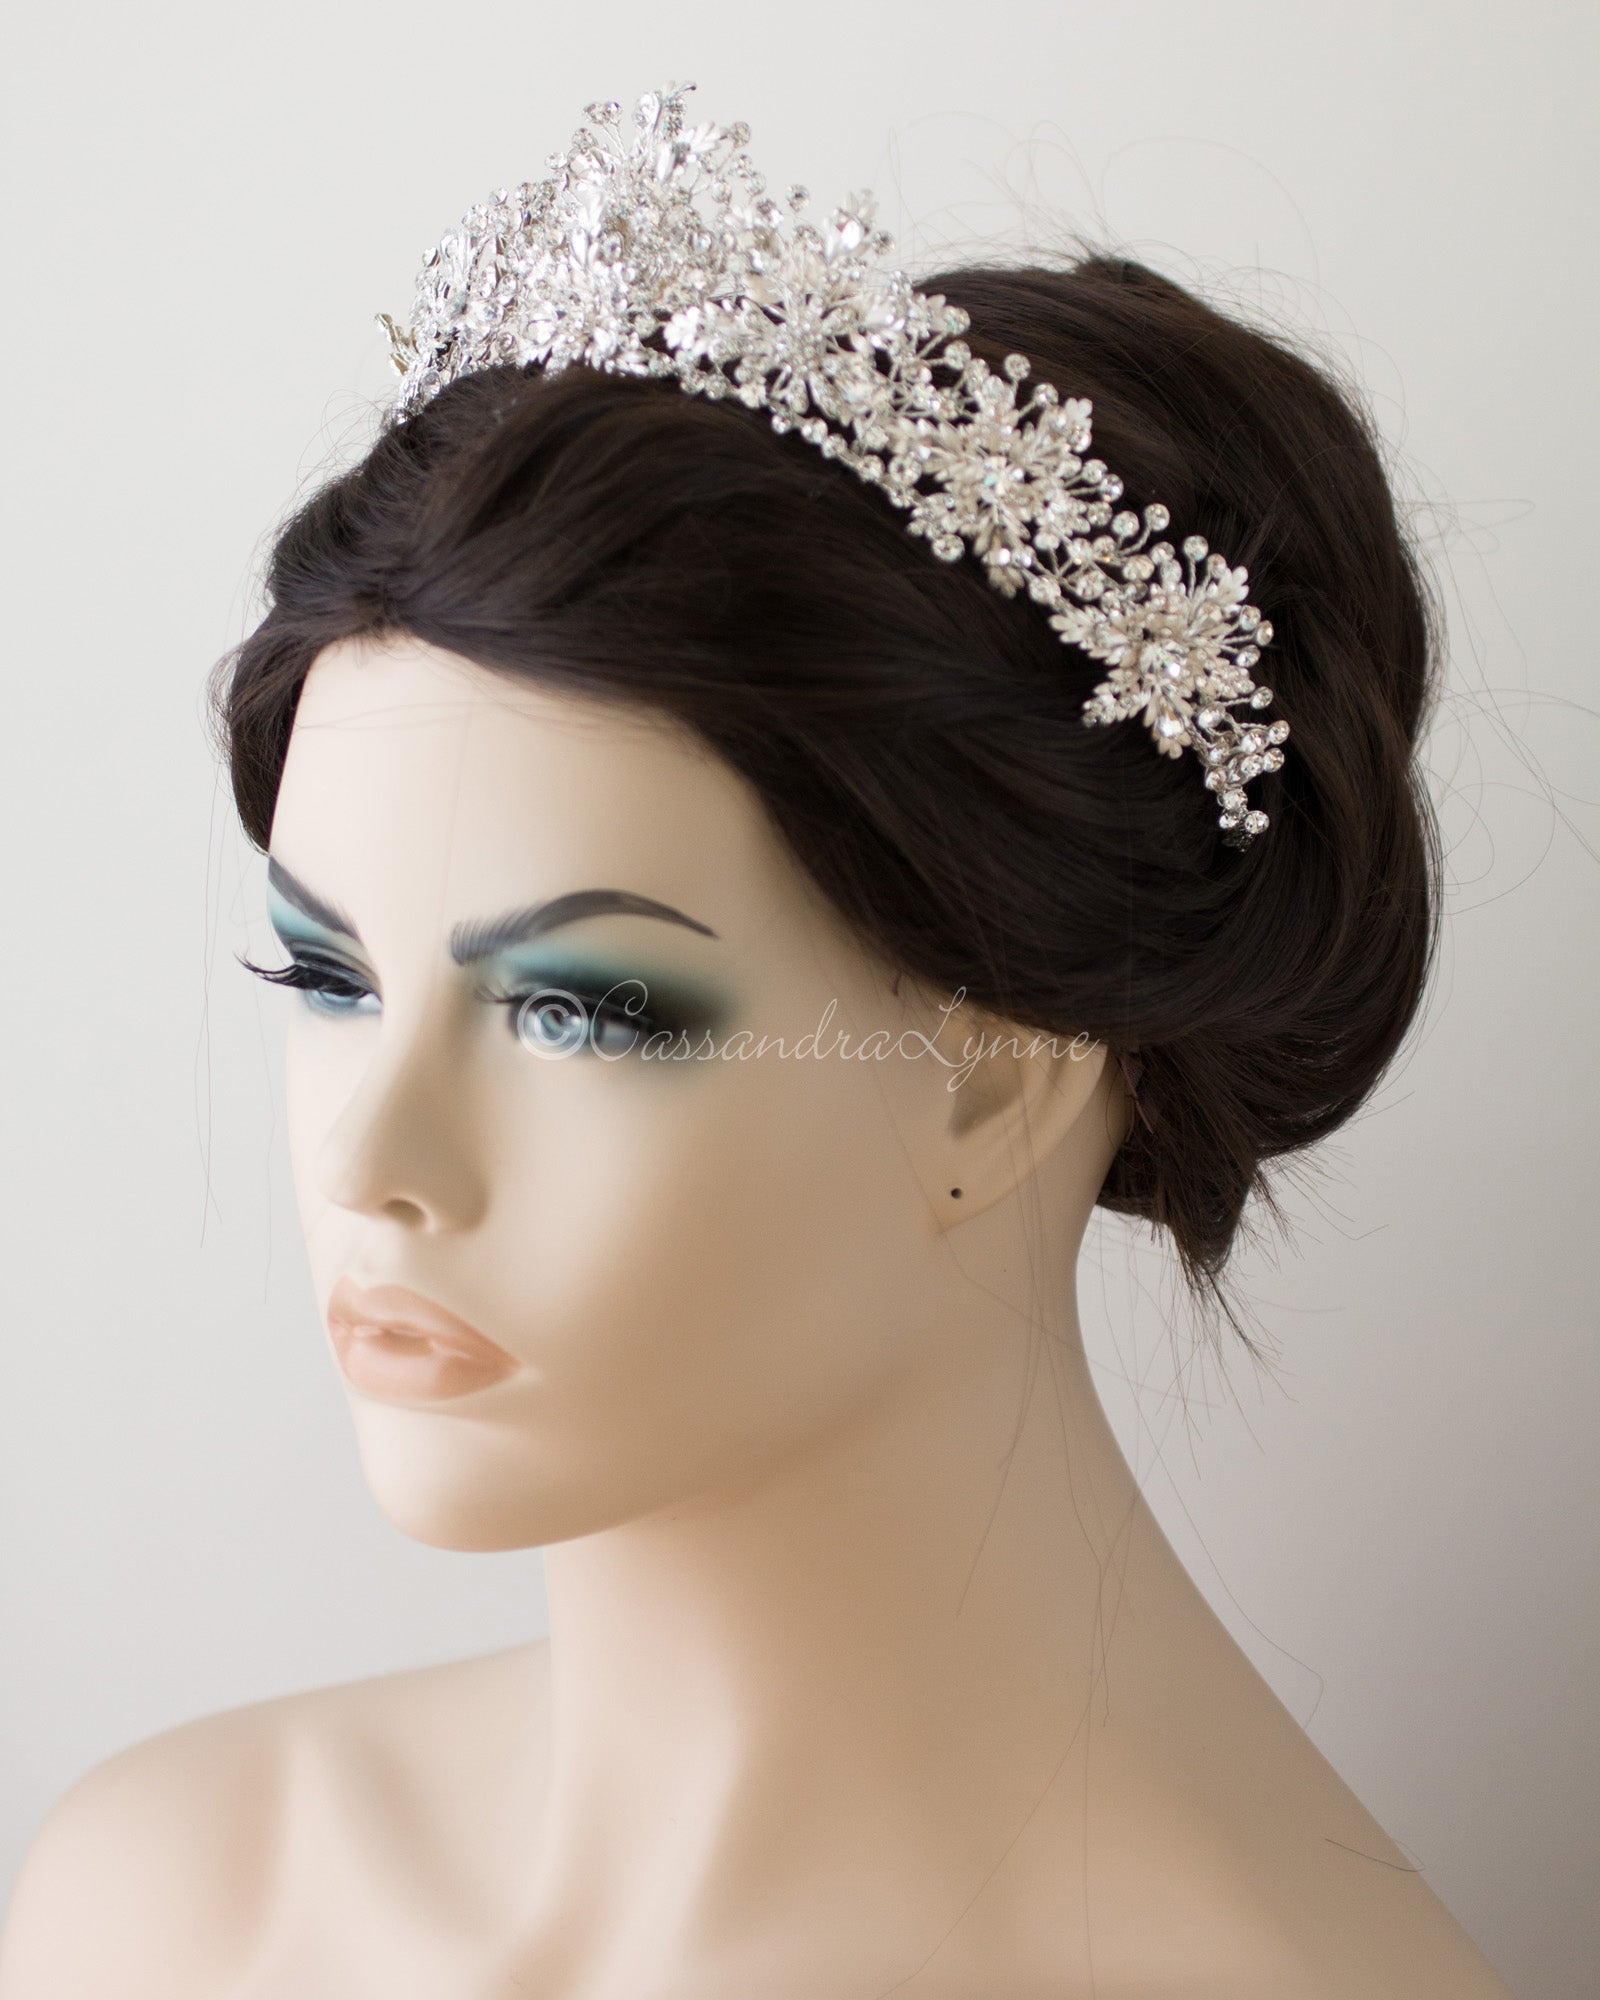 Bridal Tiara of Ivory Frosted Flowers and Jewels - Cassandra Lynne